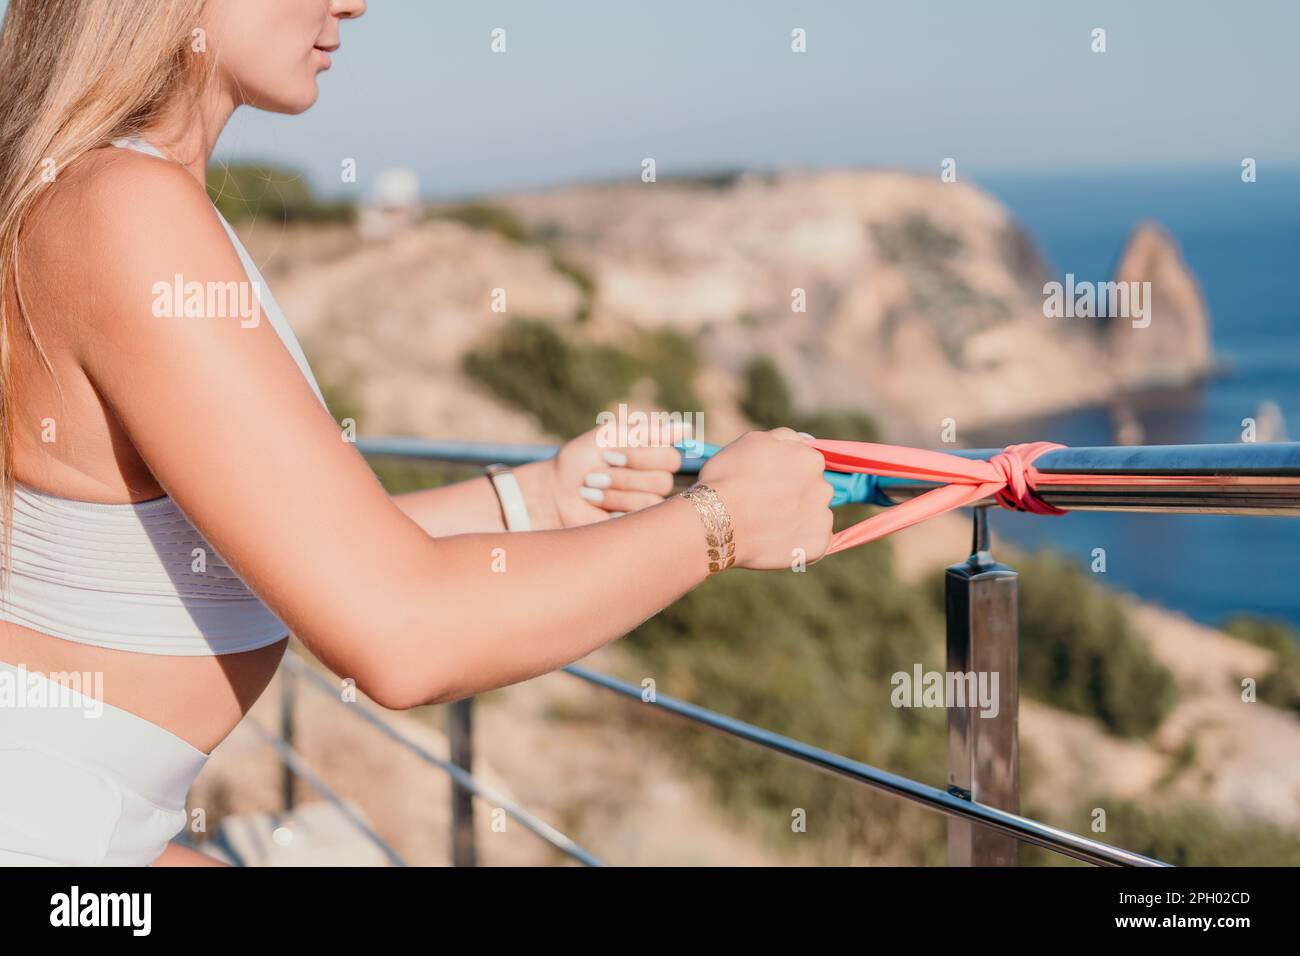 Fitness woman sea. Outdoor workout with fitness rubber bands in park over beach. Female fitness yoga routine concept. Healthy lifestyle. Happy fit Stock Photo